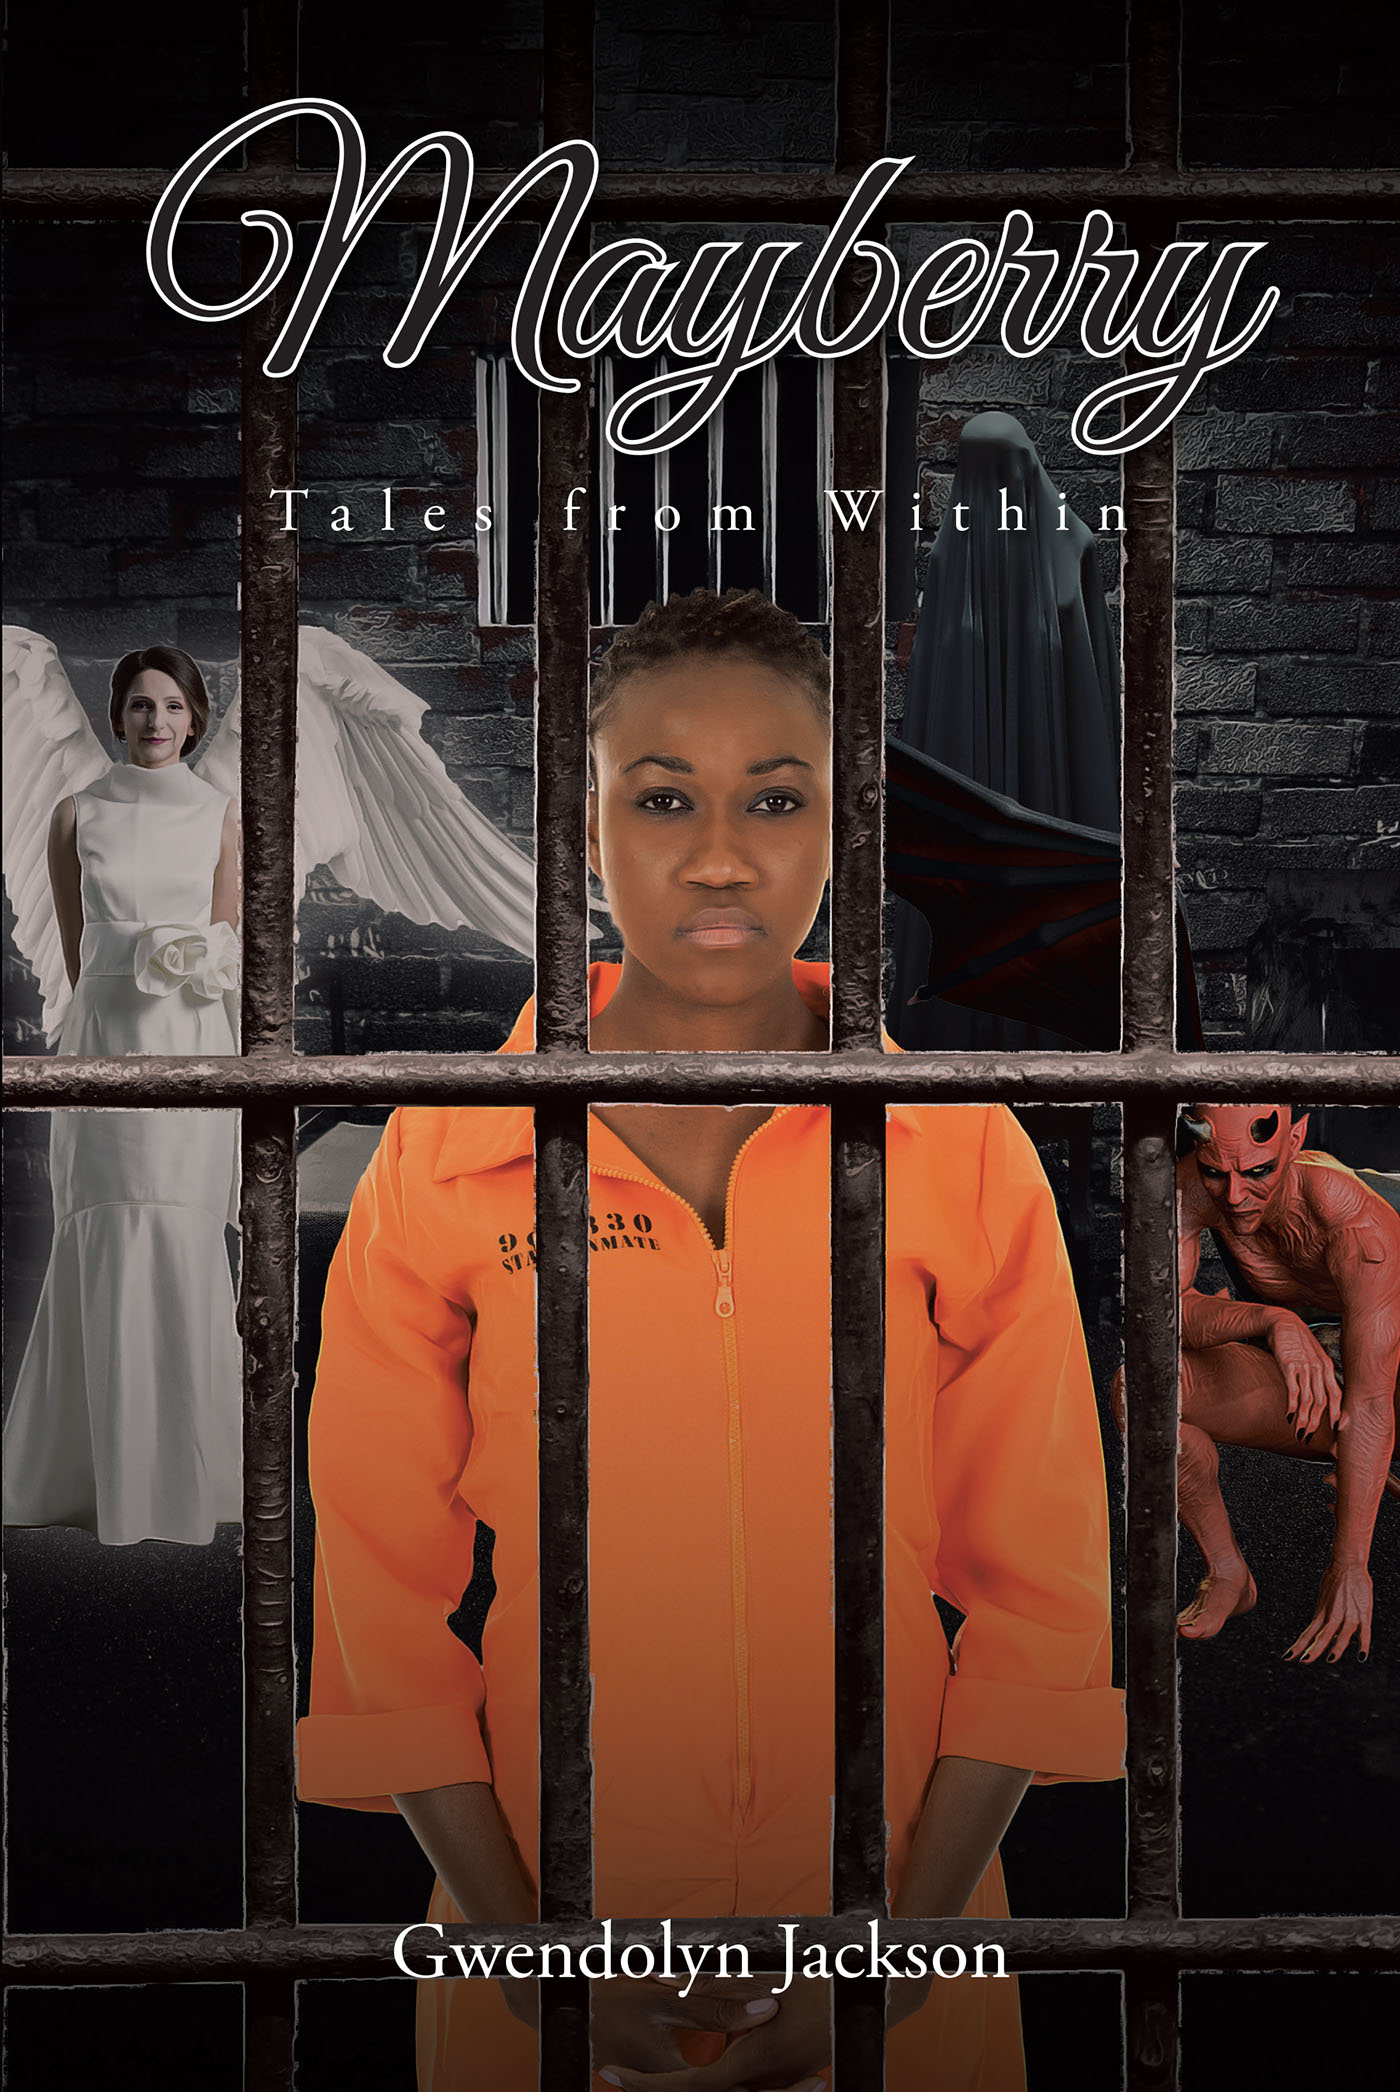 Gwendolyn Jackson’s Newly Released "Mayberry: Tales from Within" is an Engaging Collection of Stories Drawn from a Unique Experience